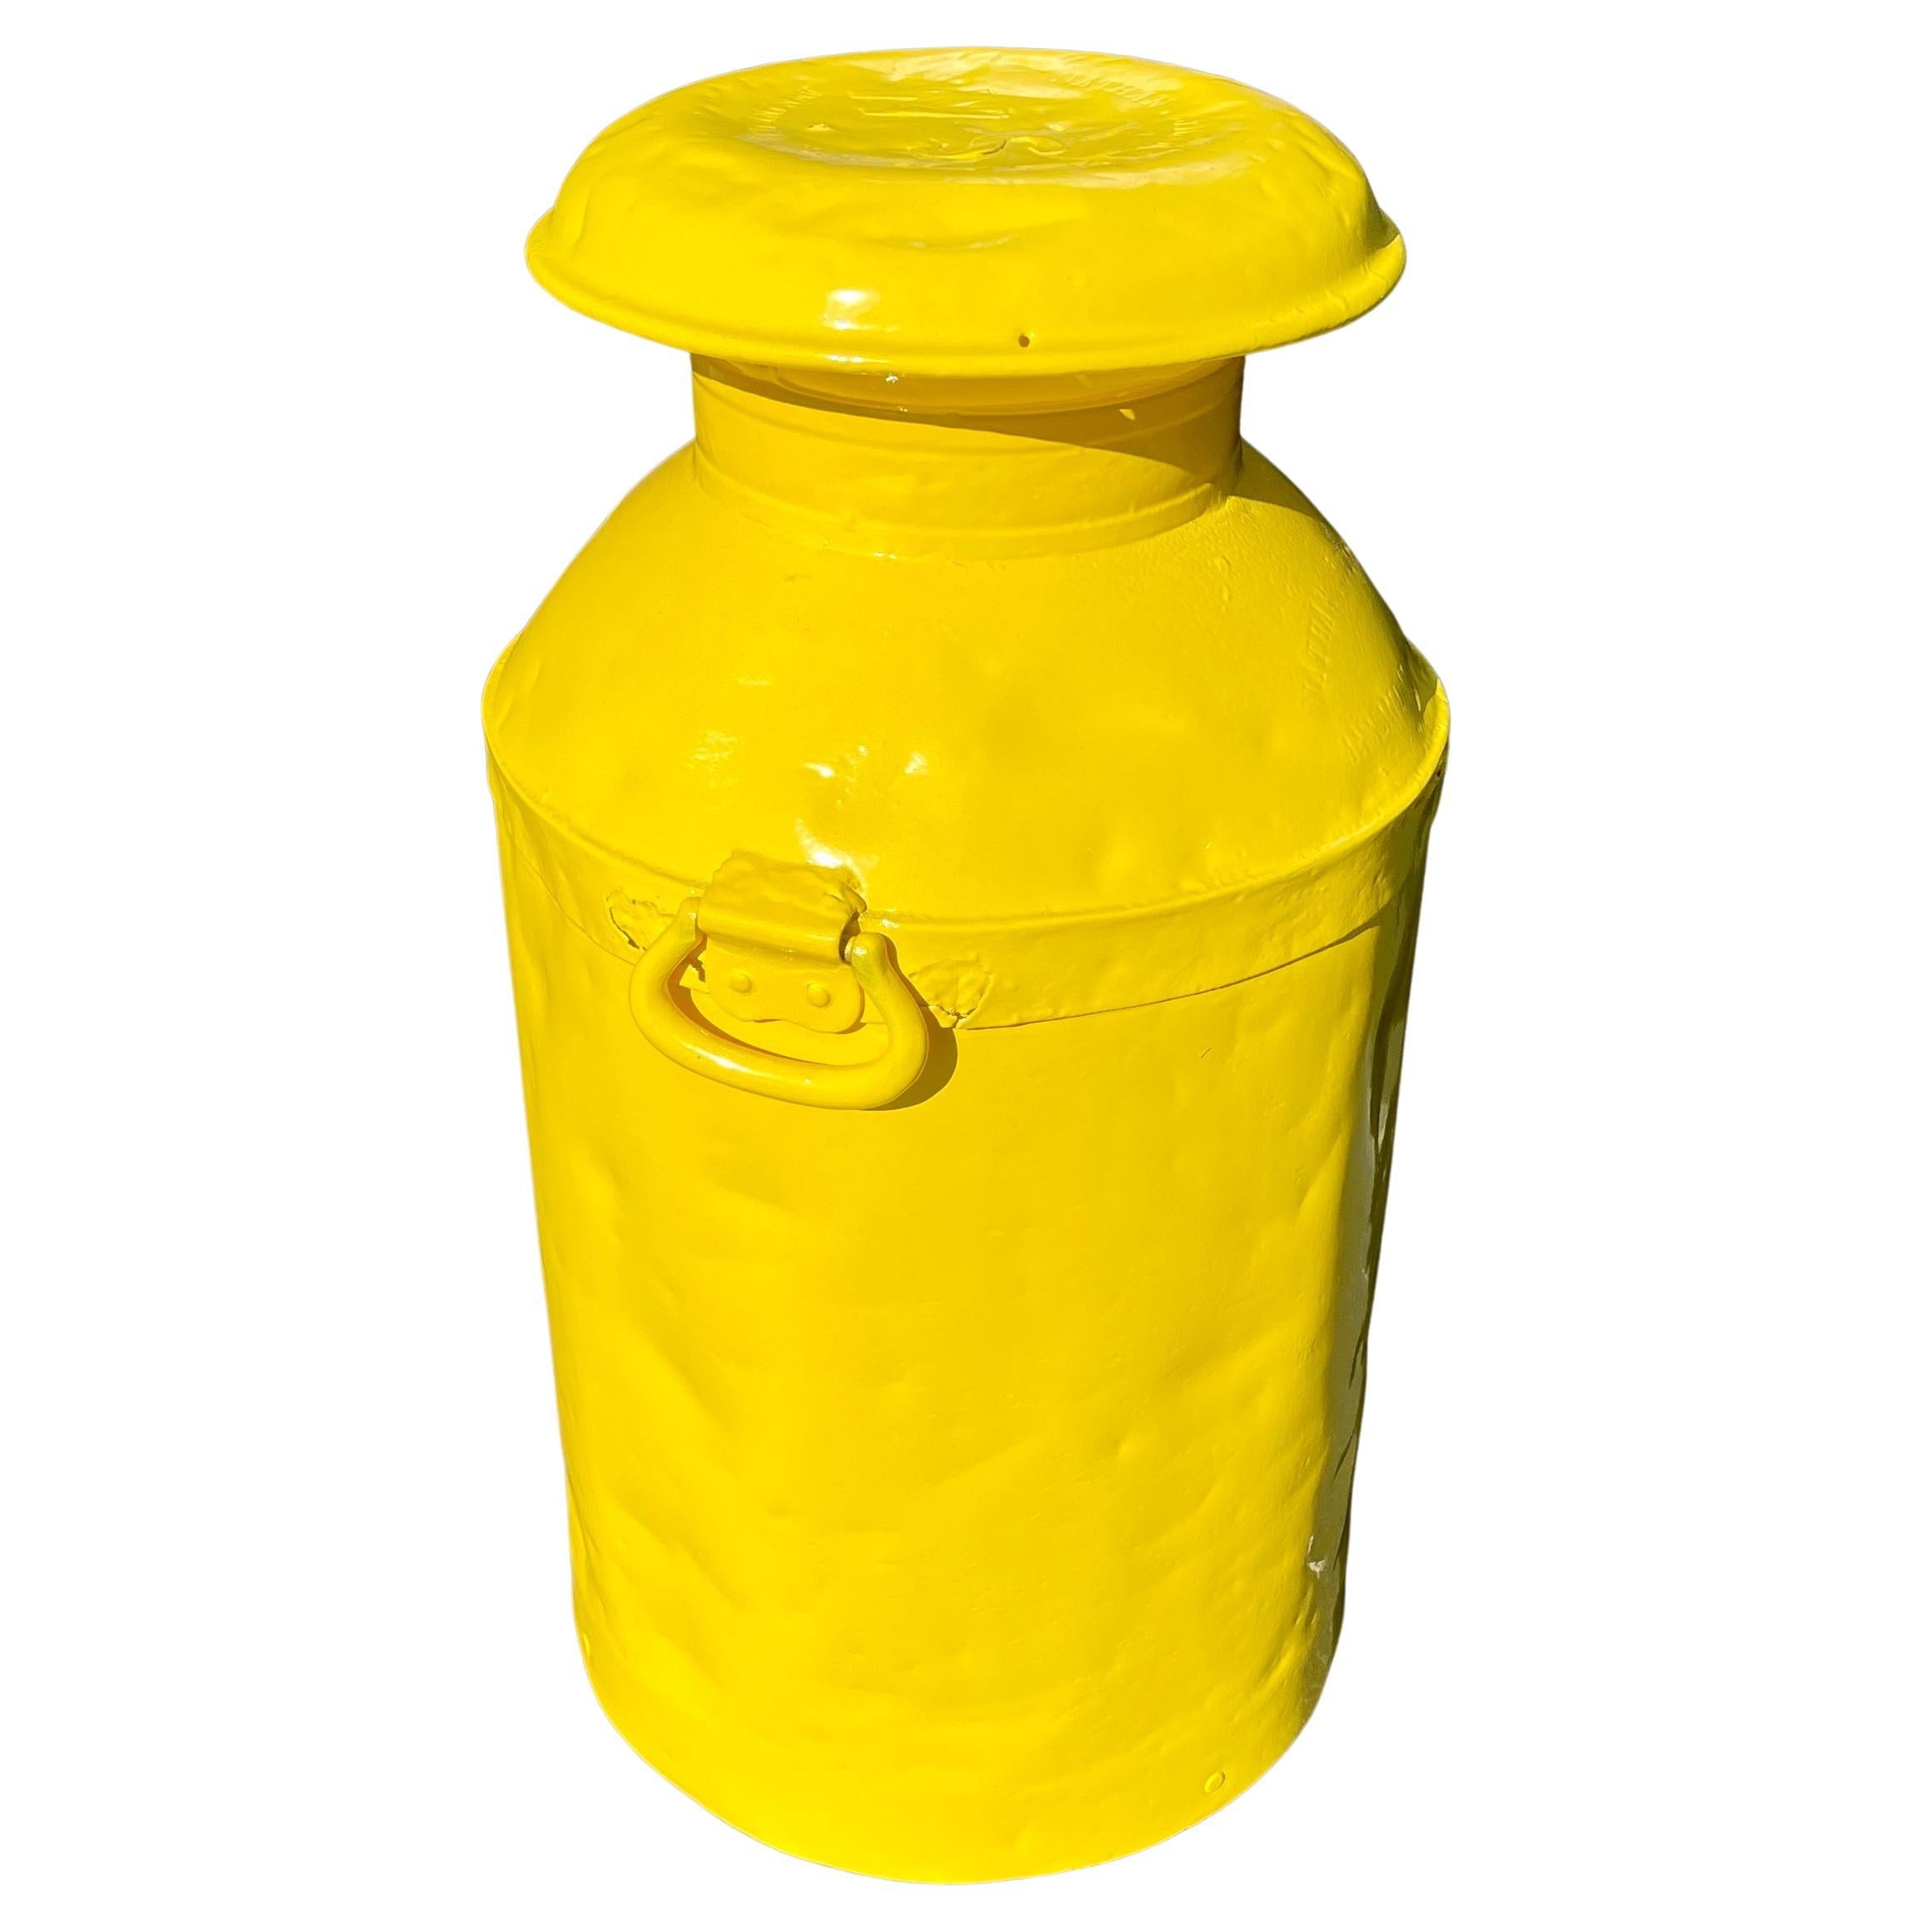 American Vintage Metal Milk Jug Side Table, Powder Coated Yellow, Bright Sunshine For Sale